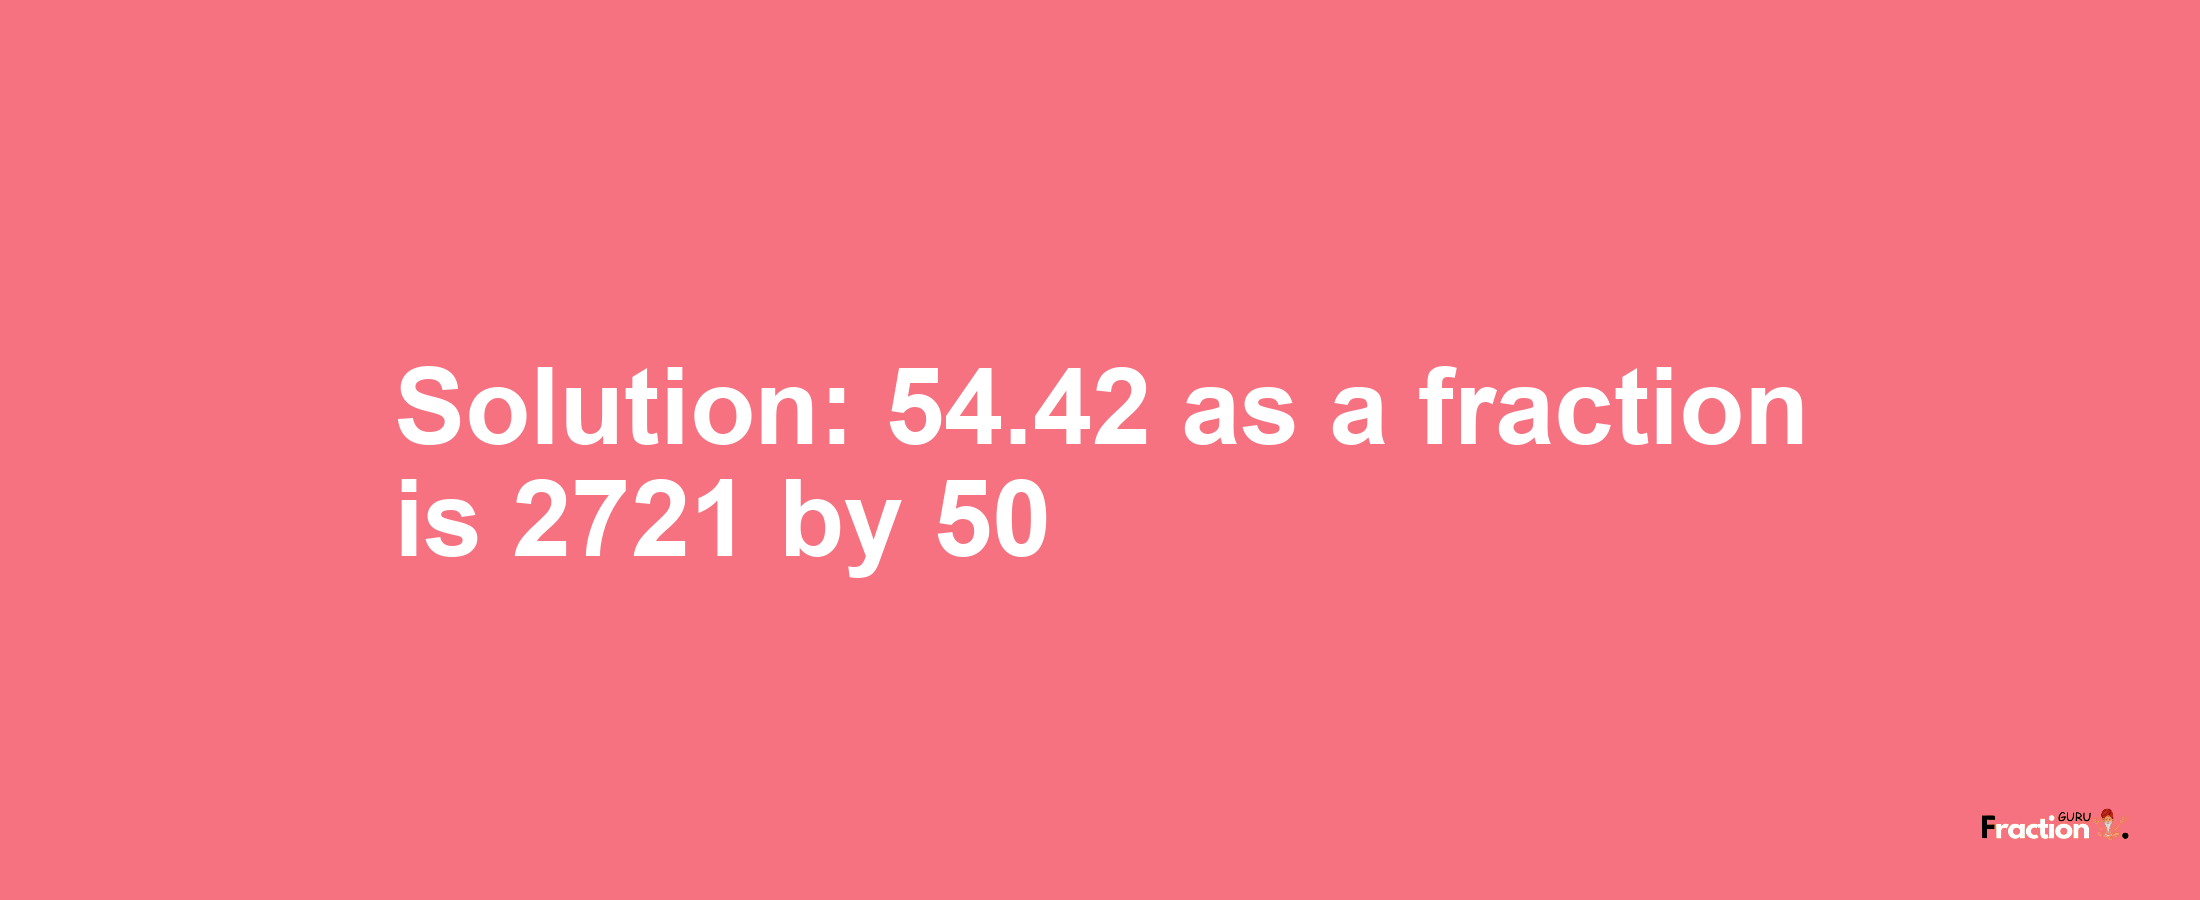 Solution:54.42 as a fraction is 2721/50